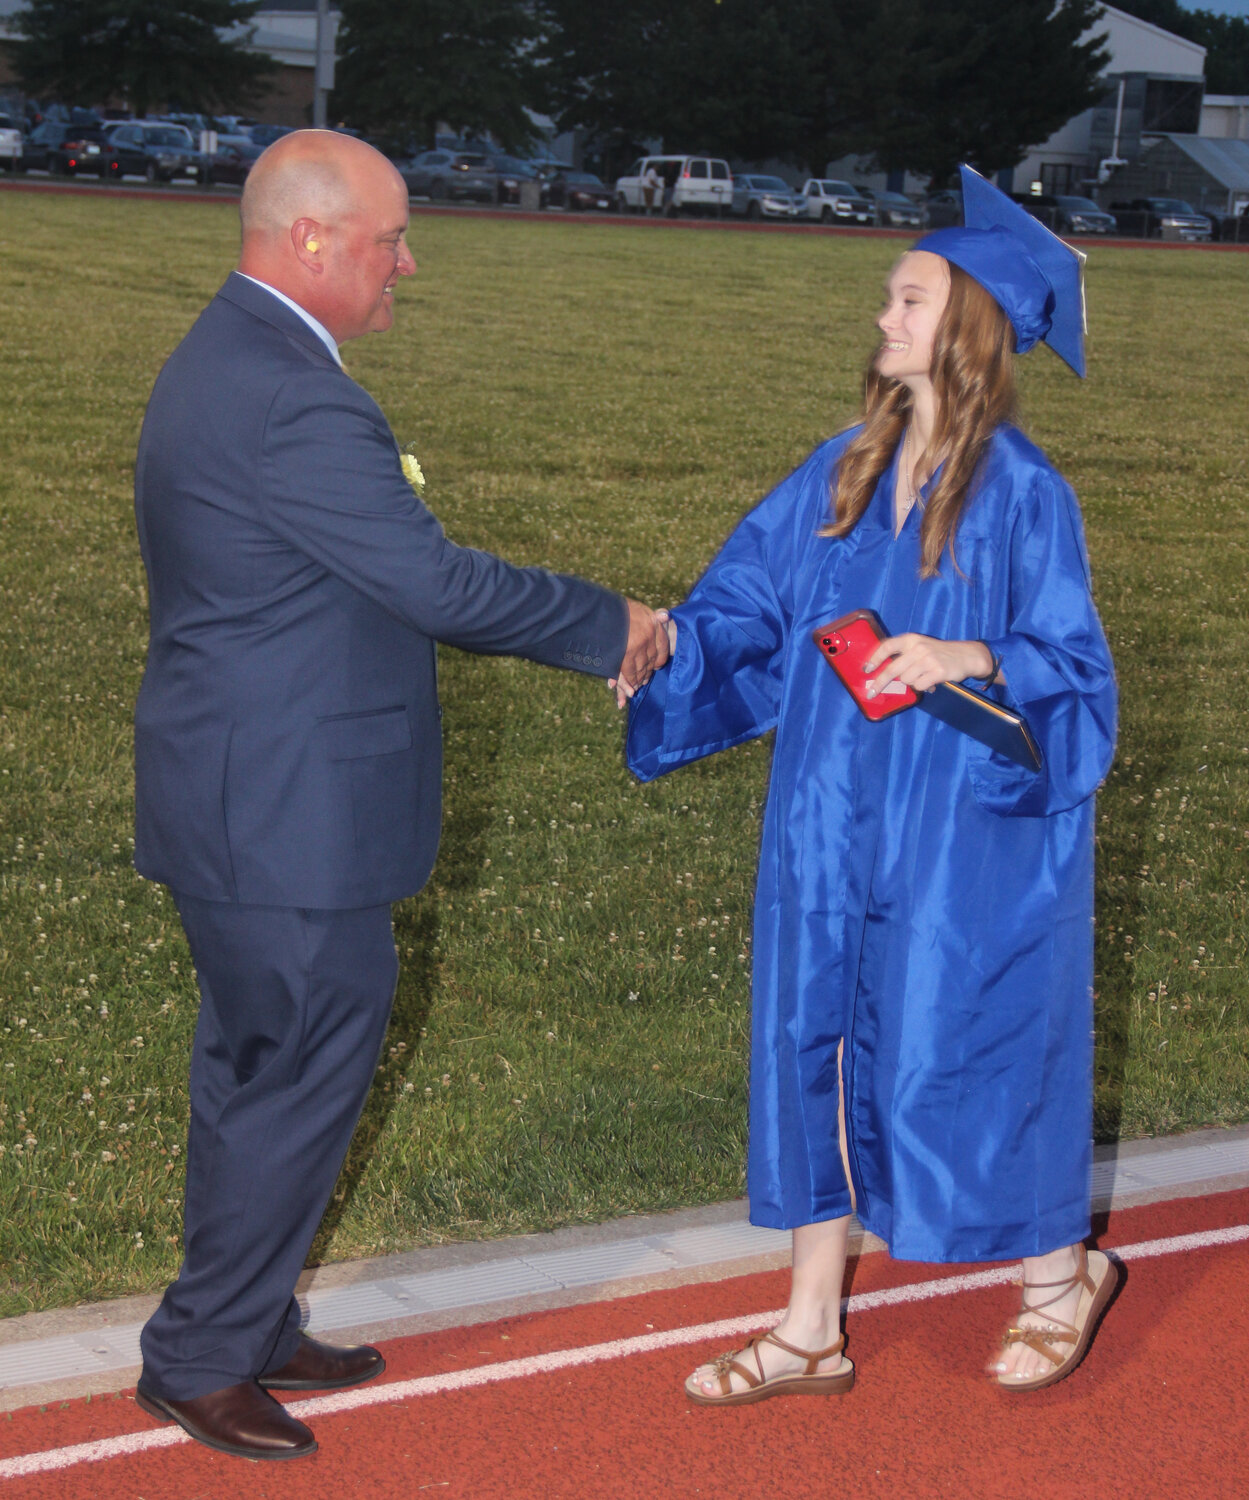 Sophia Badalamenti shakes hands with Principal Matt Brooks after she walked across the stage during the Wright City High School graduation ceremony.